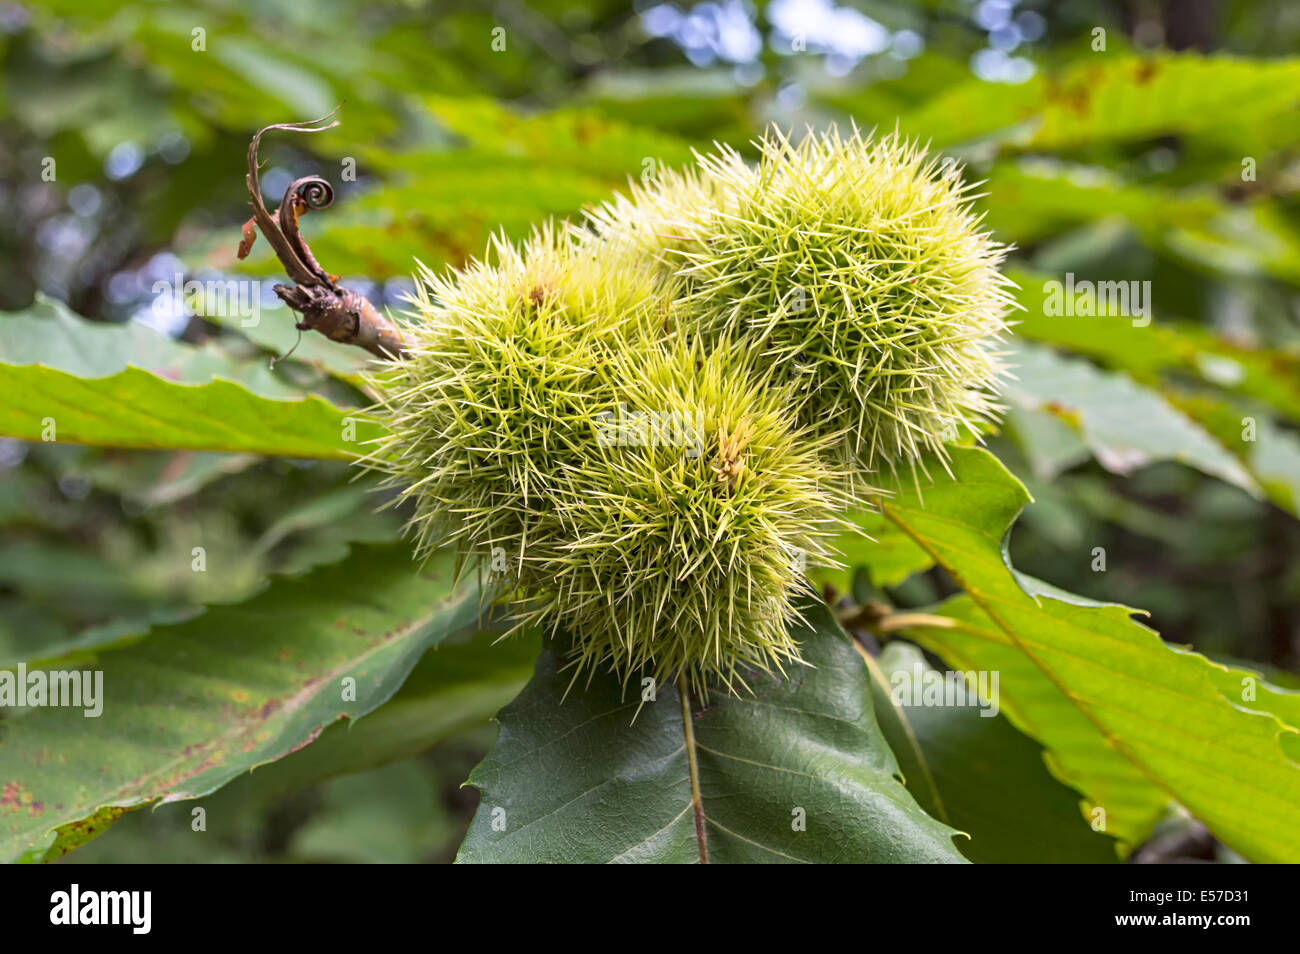 Horse chestnut with green leaves on tree. Stock Photo